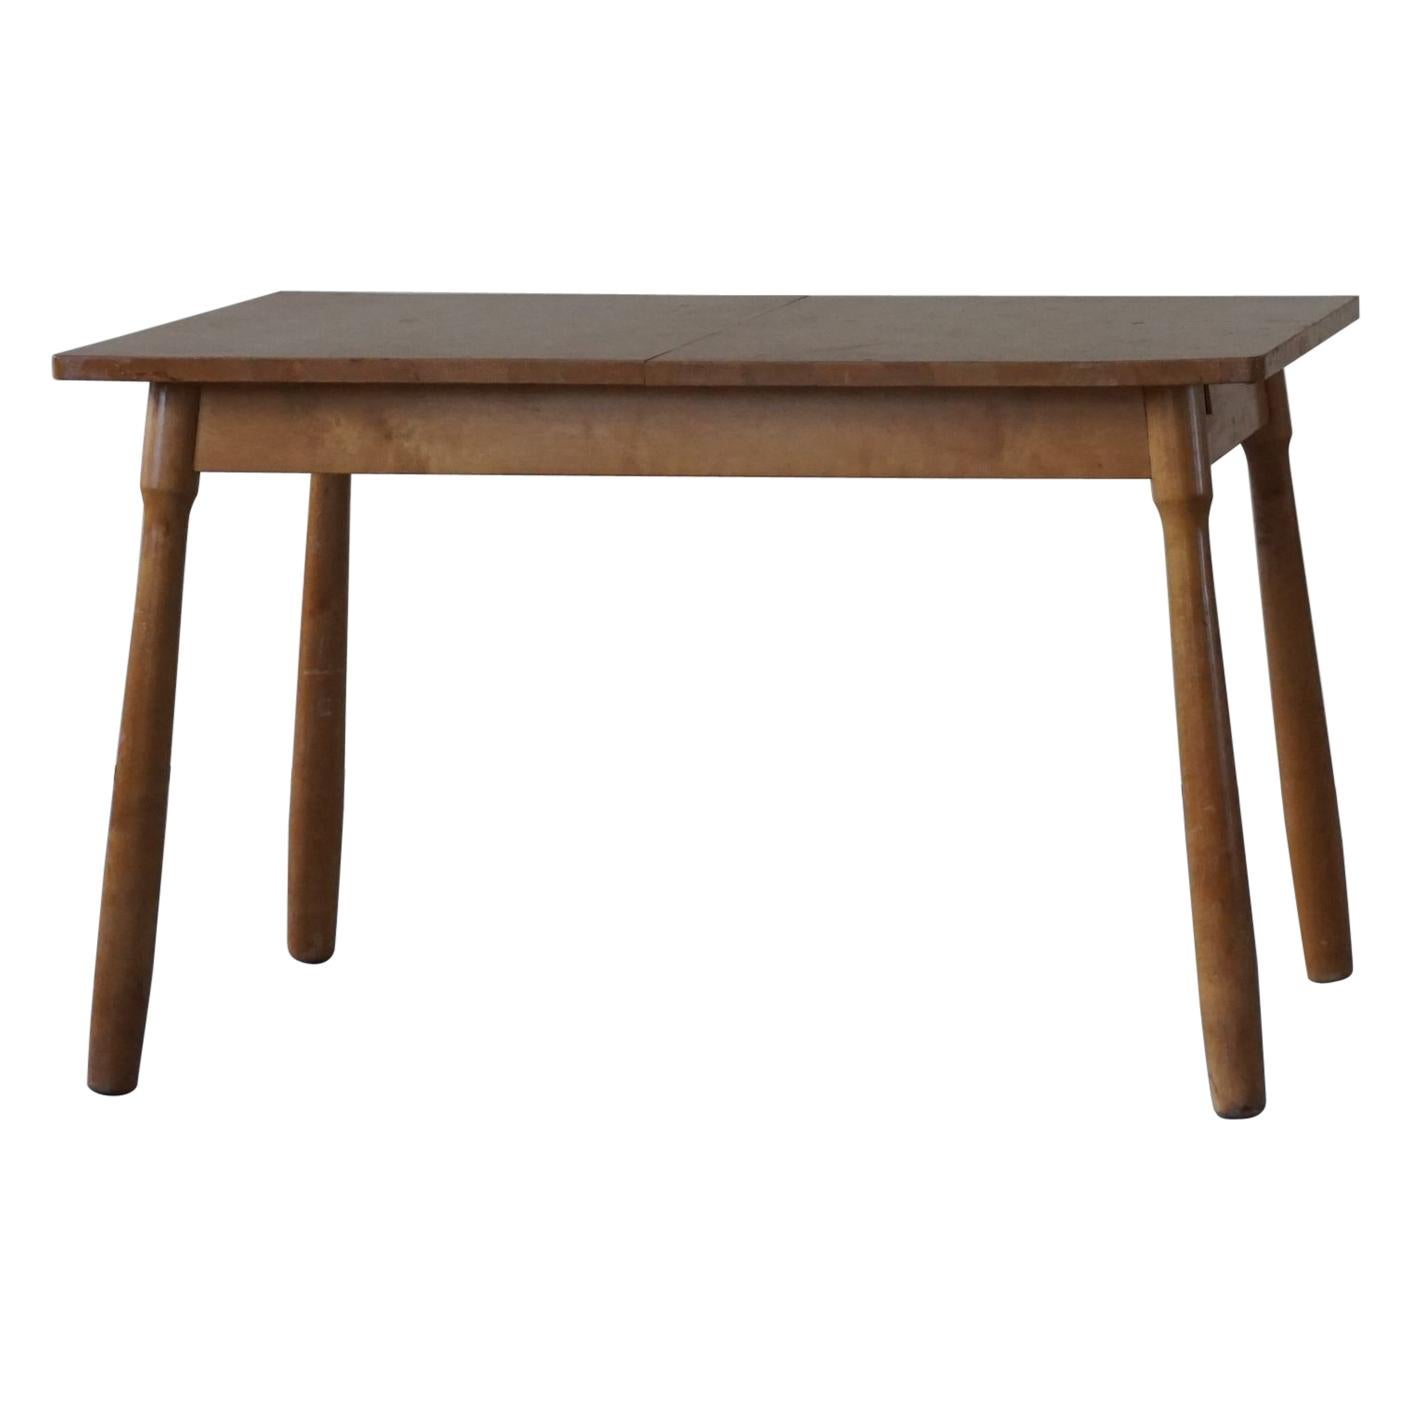 Danish Modern Desk / Dining Table in Birch Attributed to Philip Arctander, 1940s For Sale